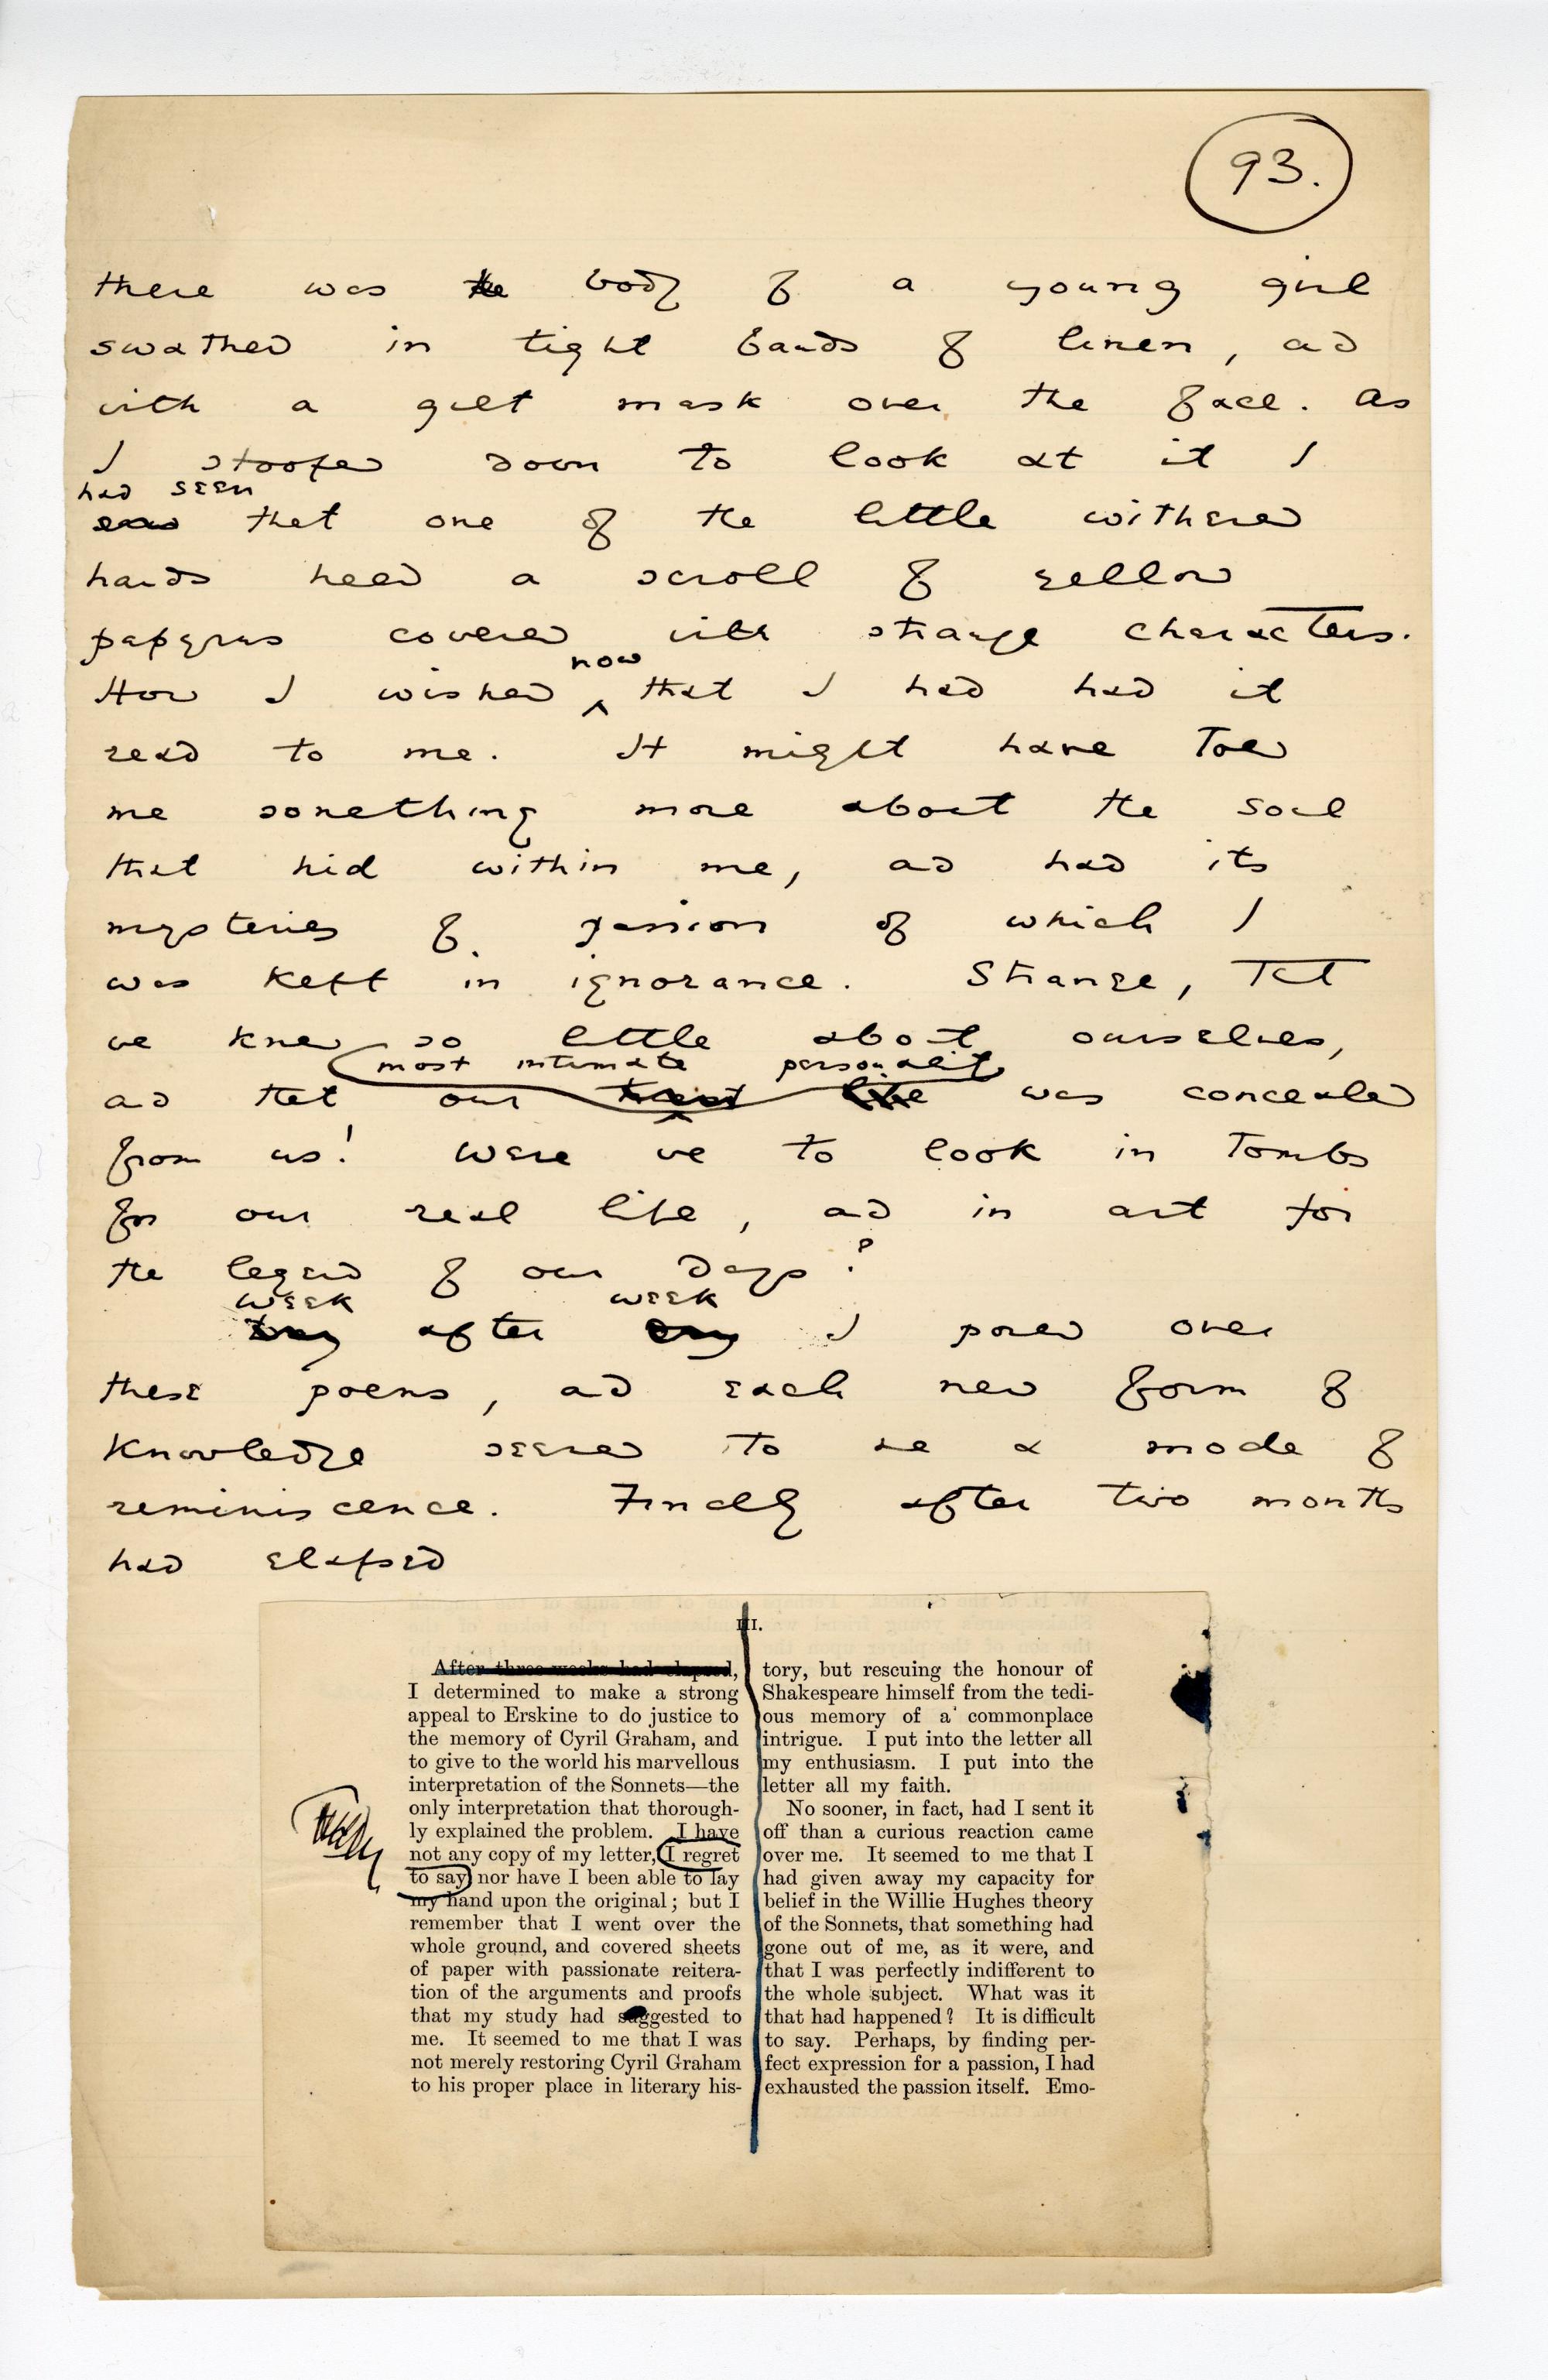 Folio 93 begins with handwriting and contains a cutout from the bottom of p. 18 (beginning of Chapter 3) of the Blackwood's 1889 printing glued dow at the bottom of this notebook page with annotations and an inkblot on the cutout.